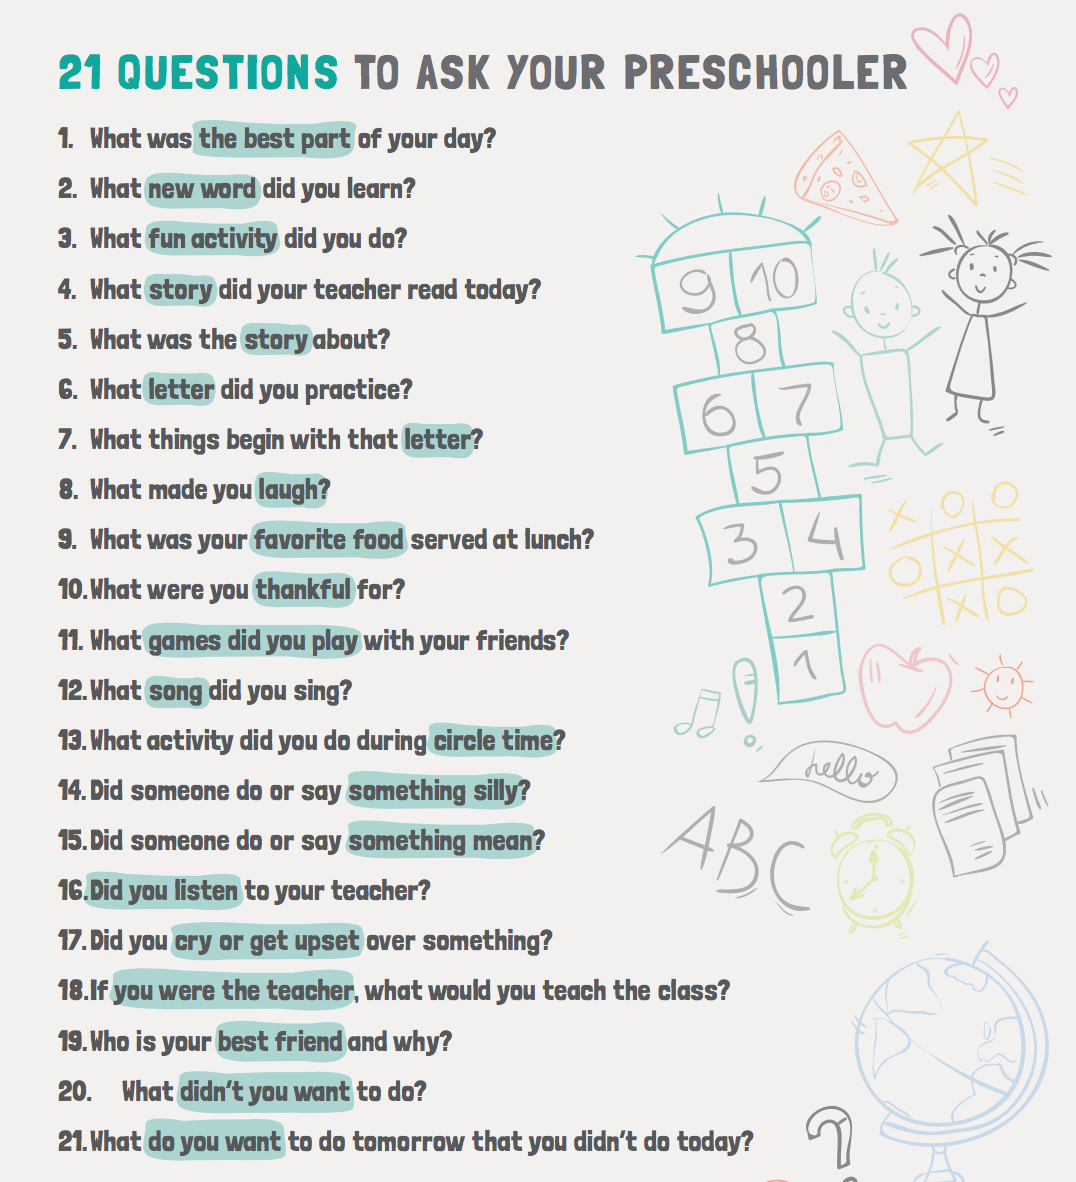 21 Questions to Ask Your Preschooler Bloggy Moms Magazine